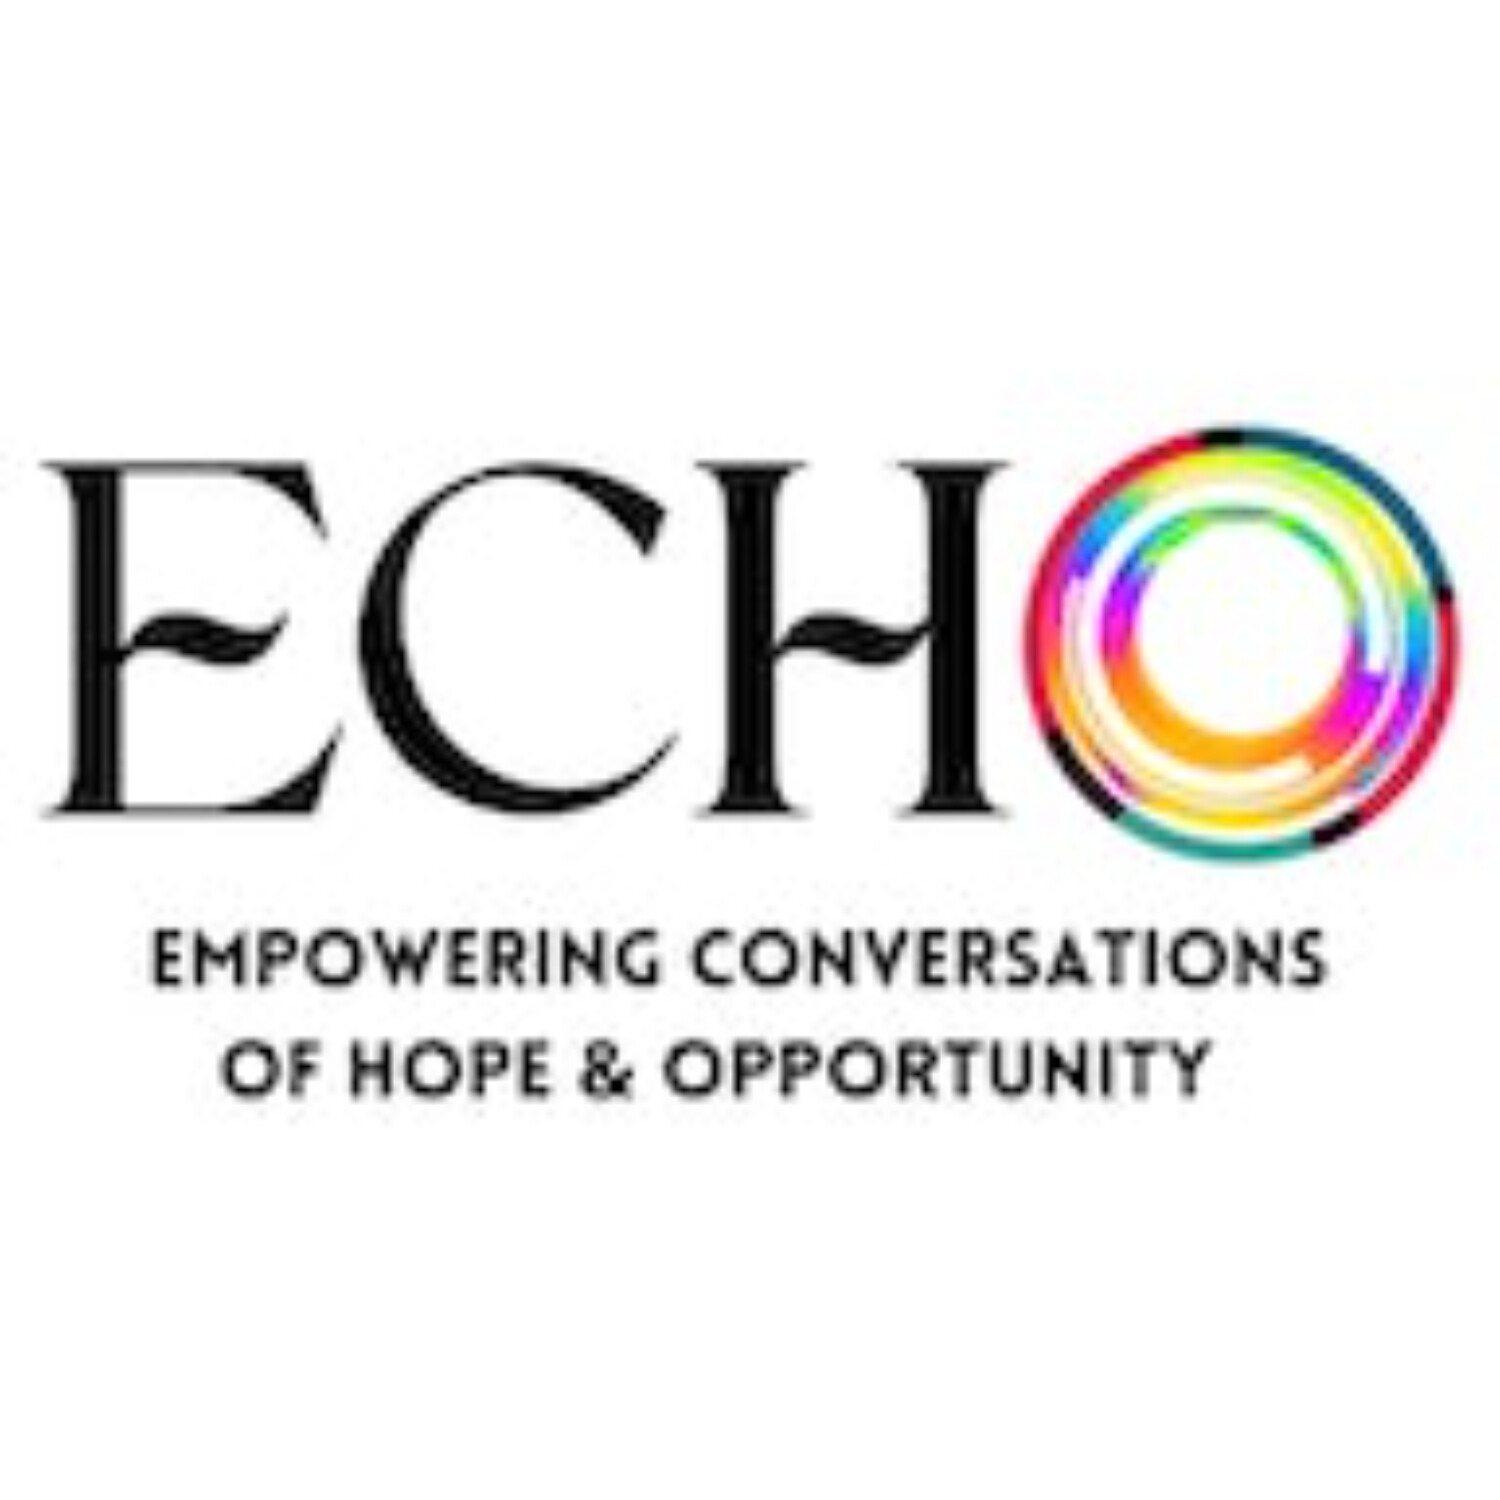 ECHO This: Dare to Share Create a safe and inclusive playground for hopeful dialogue